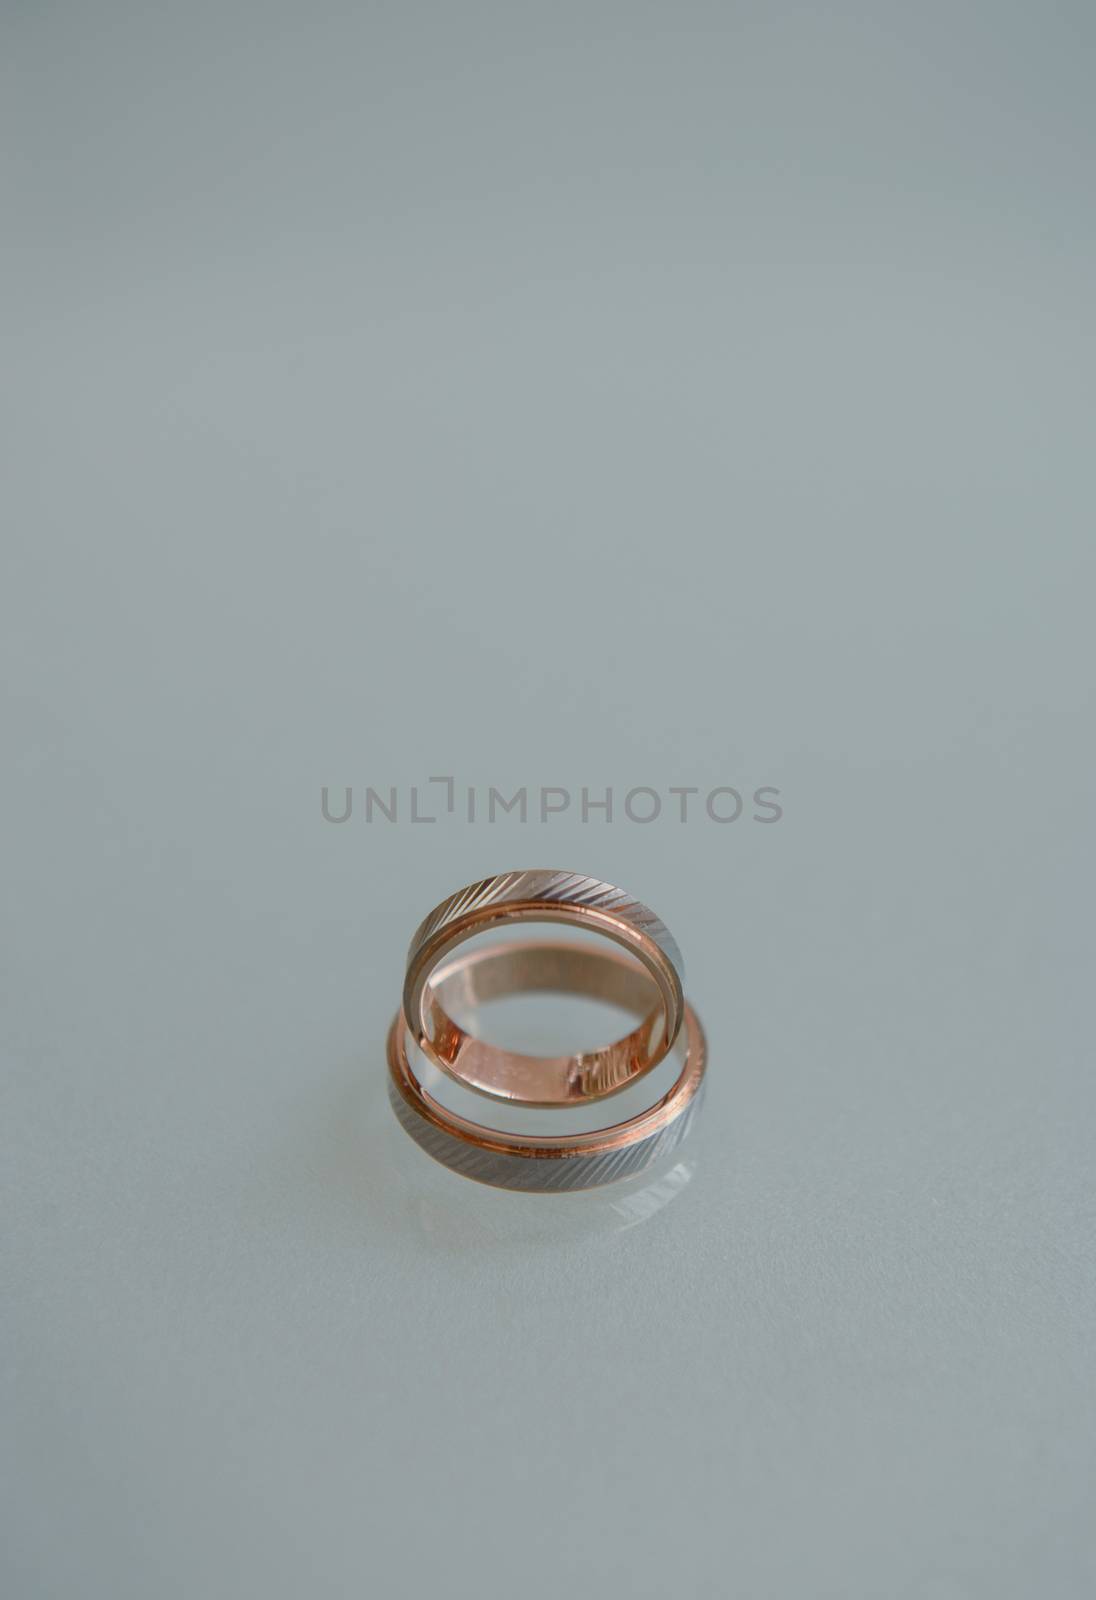 Beautiful two golden wedding rings. Made of highest quality material